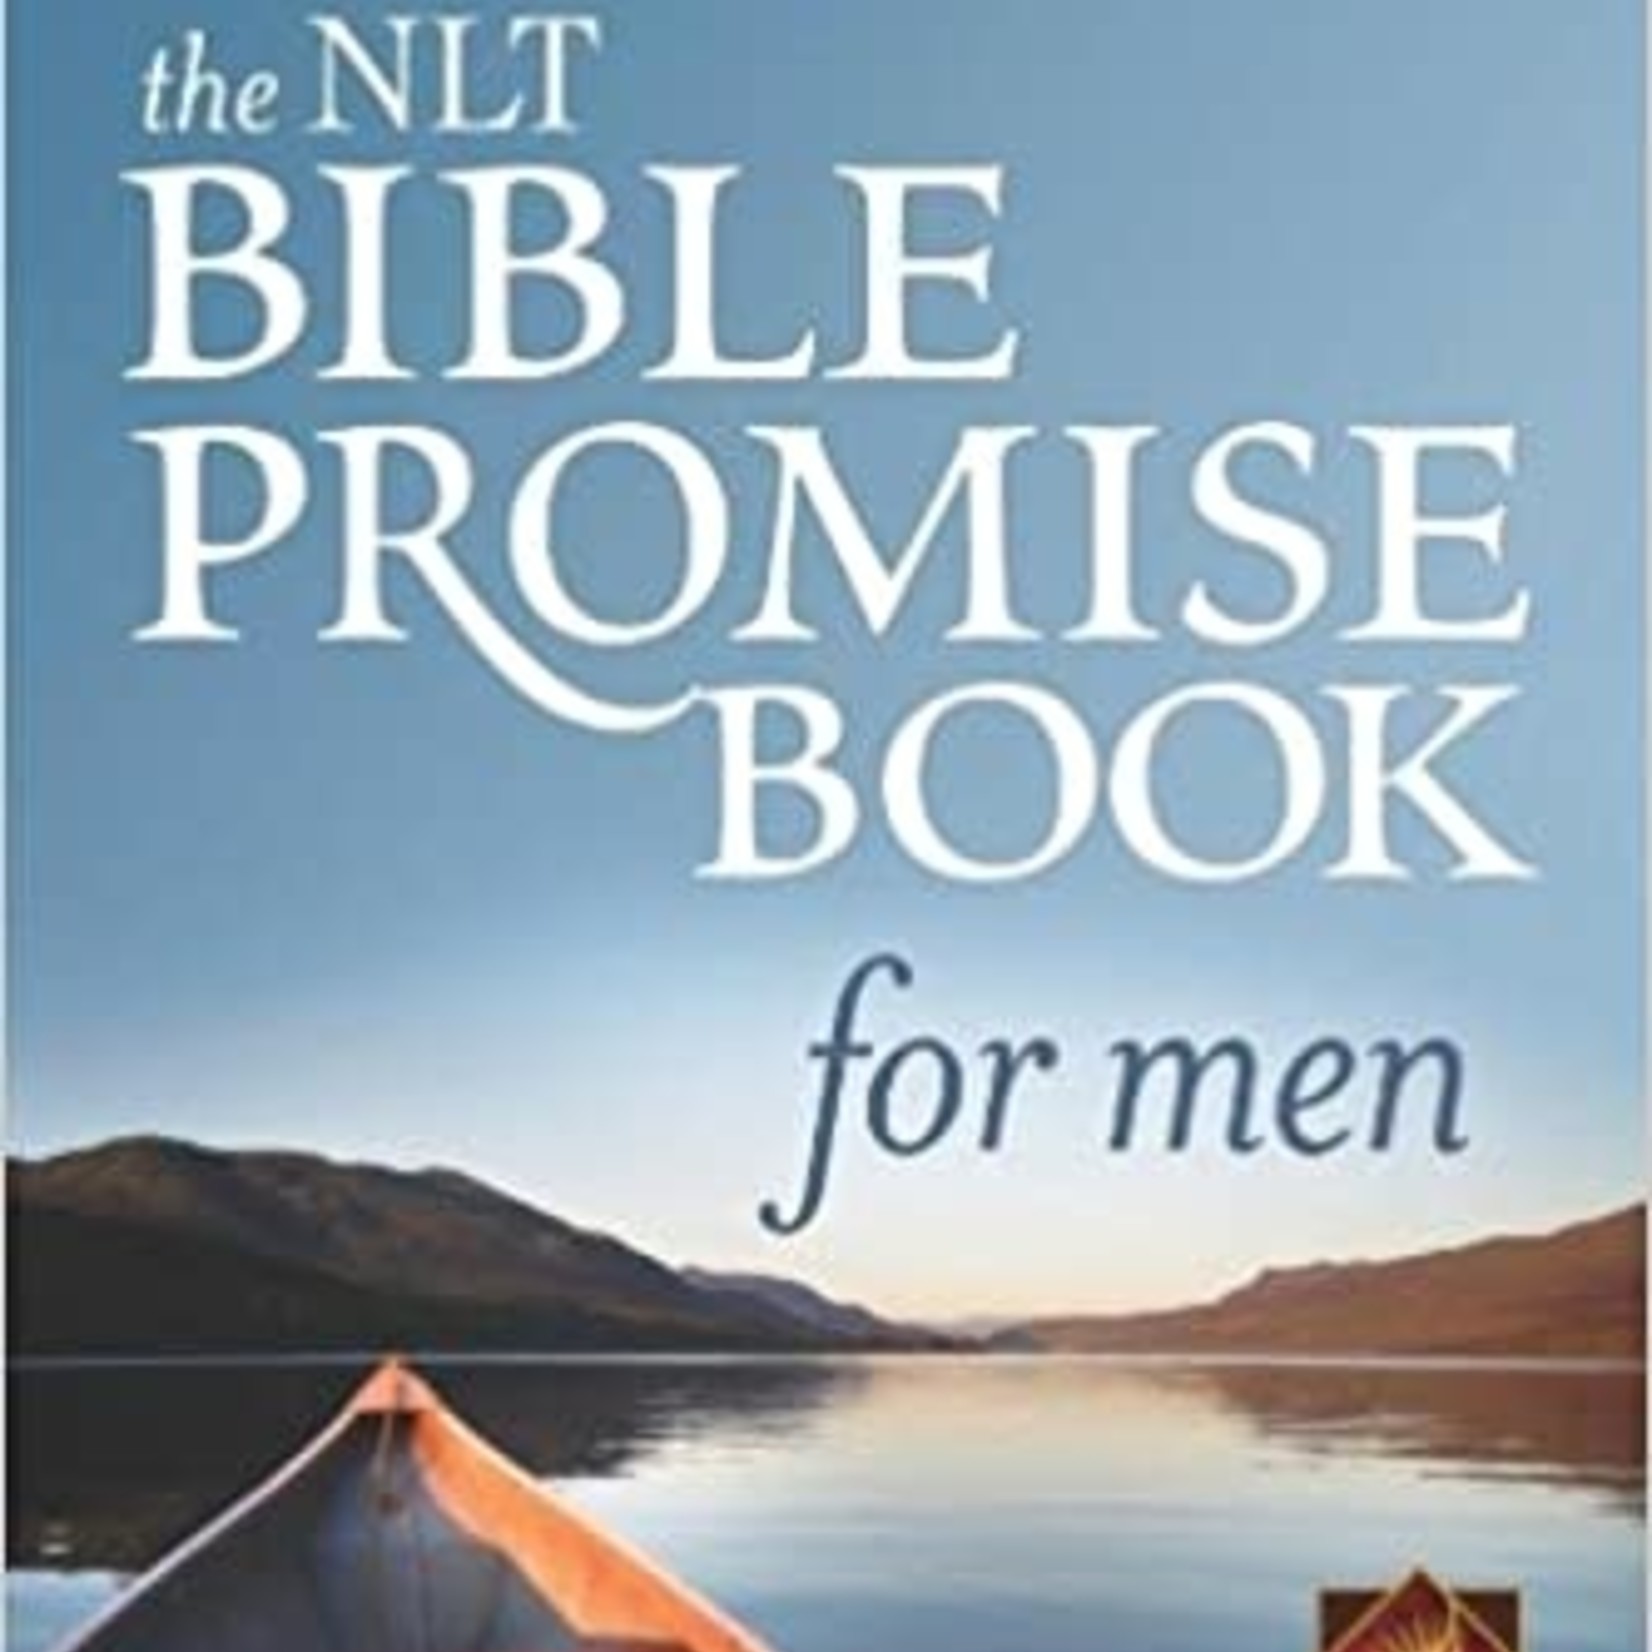 The NLT Promise Bible Book - for men